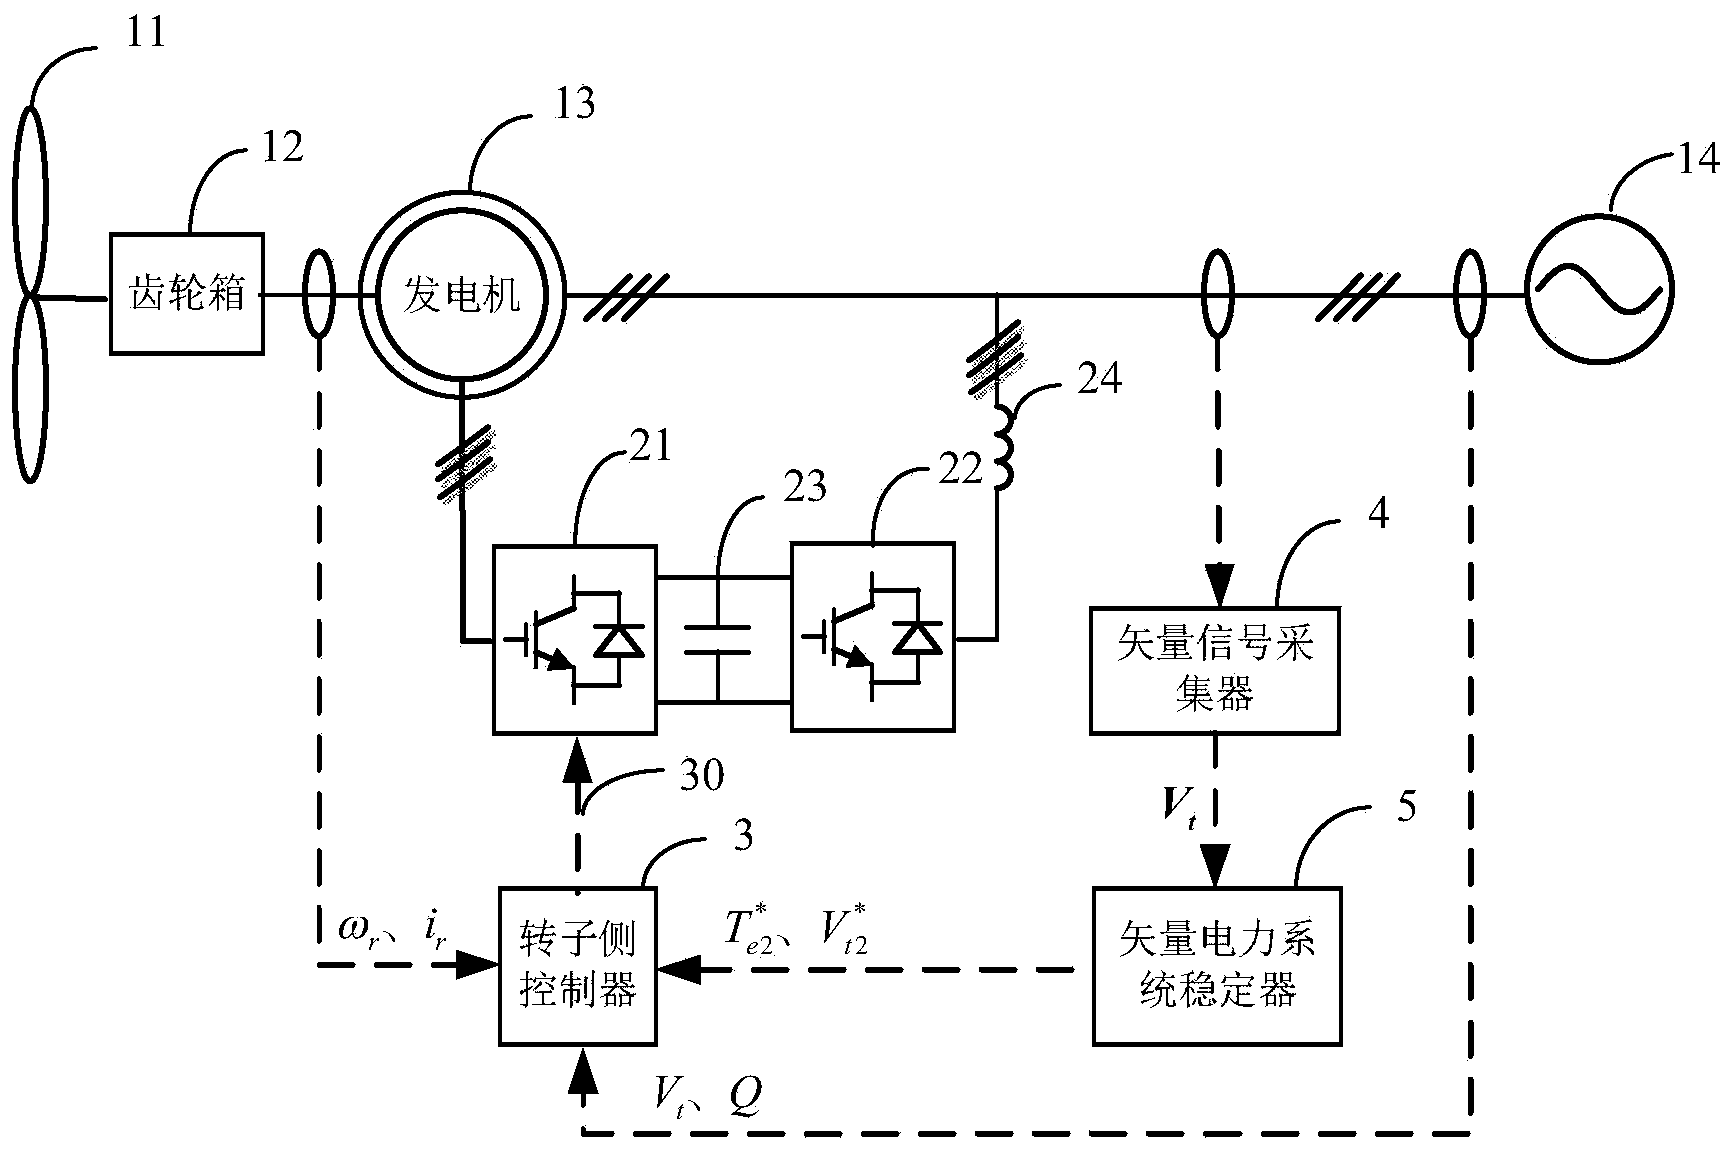 Double-fed wind power generation system based on vector power system stabilizer